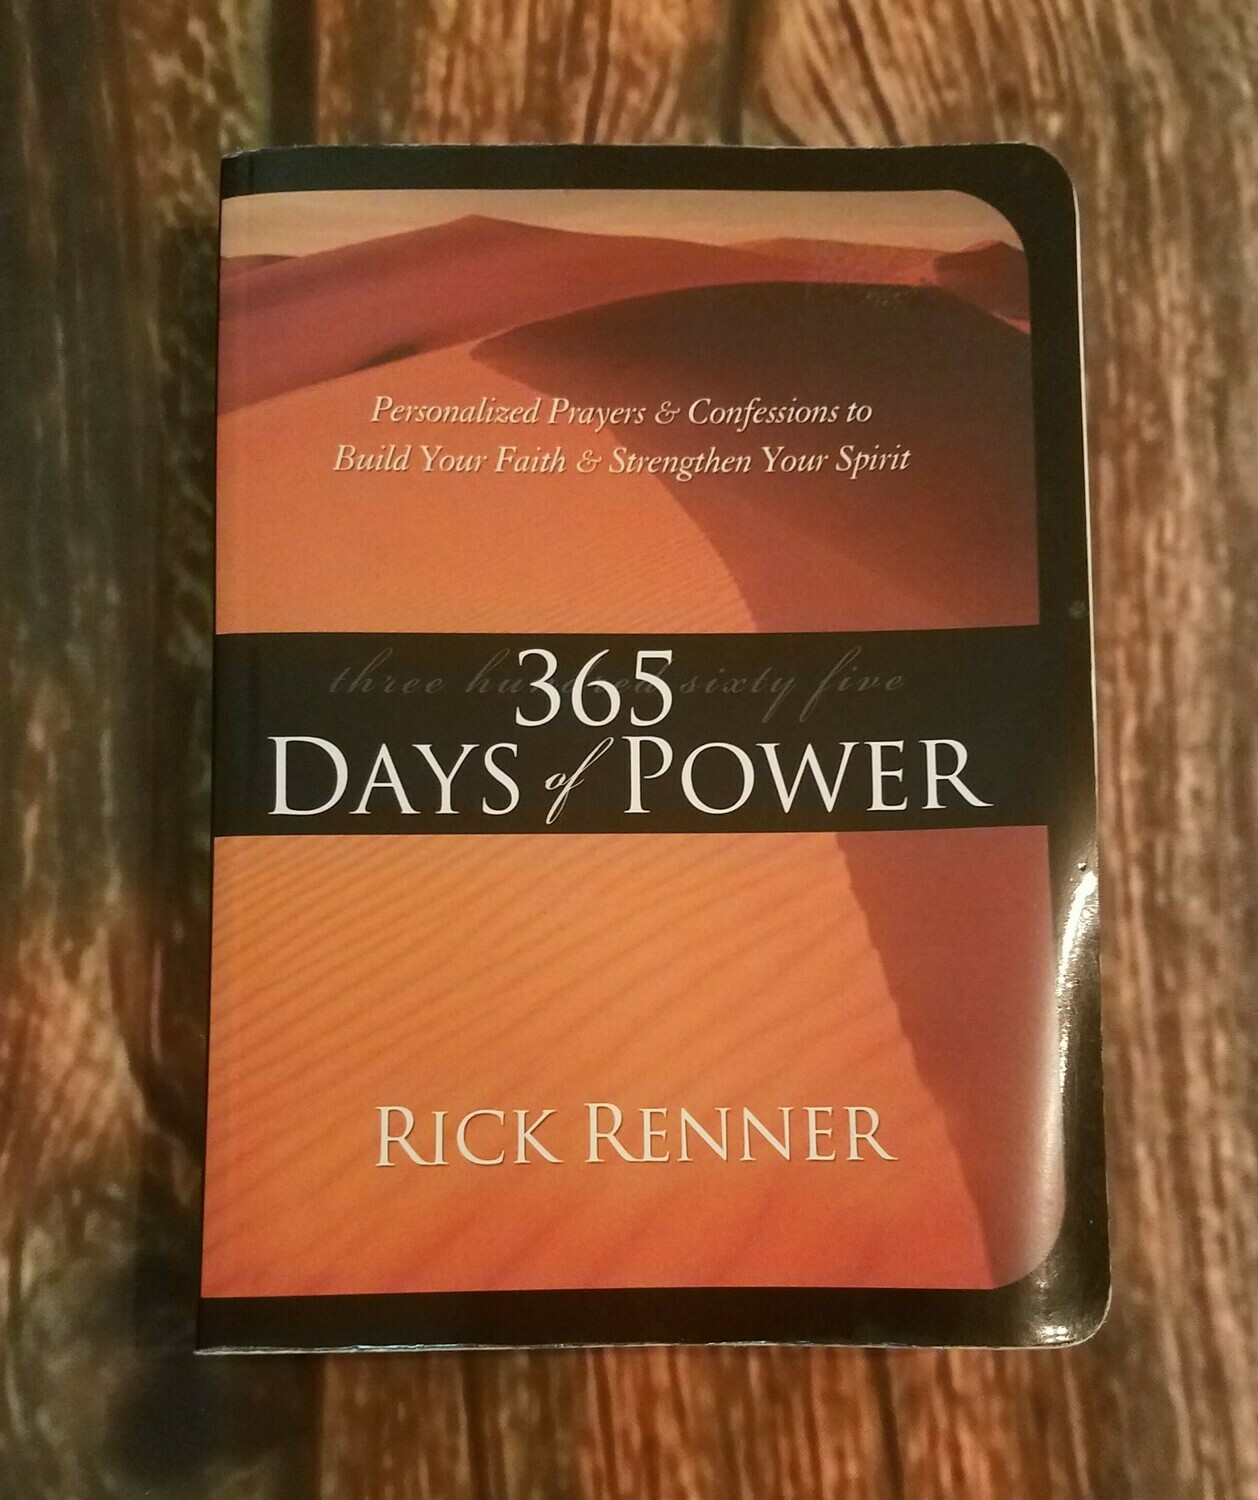 365 Days of Power by Rick Renner